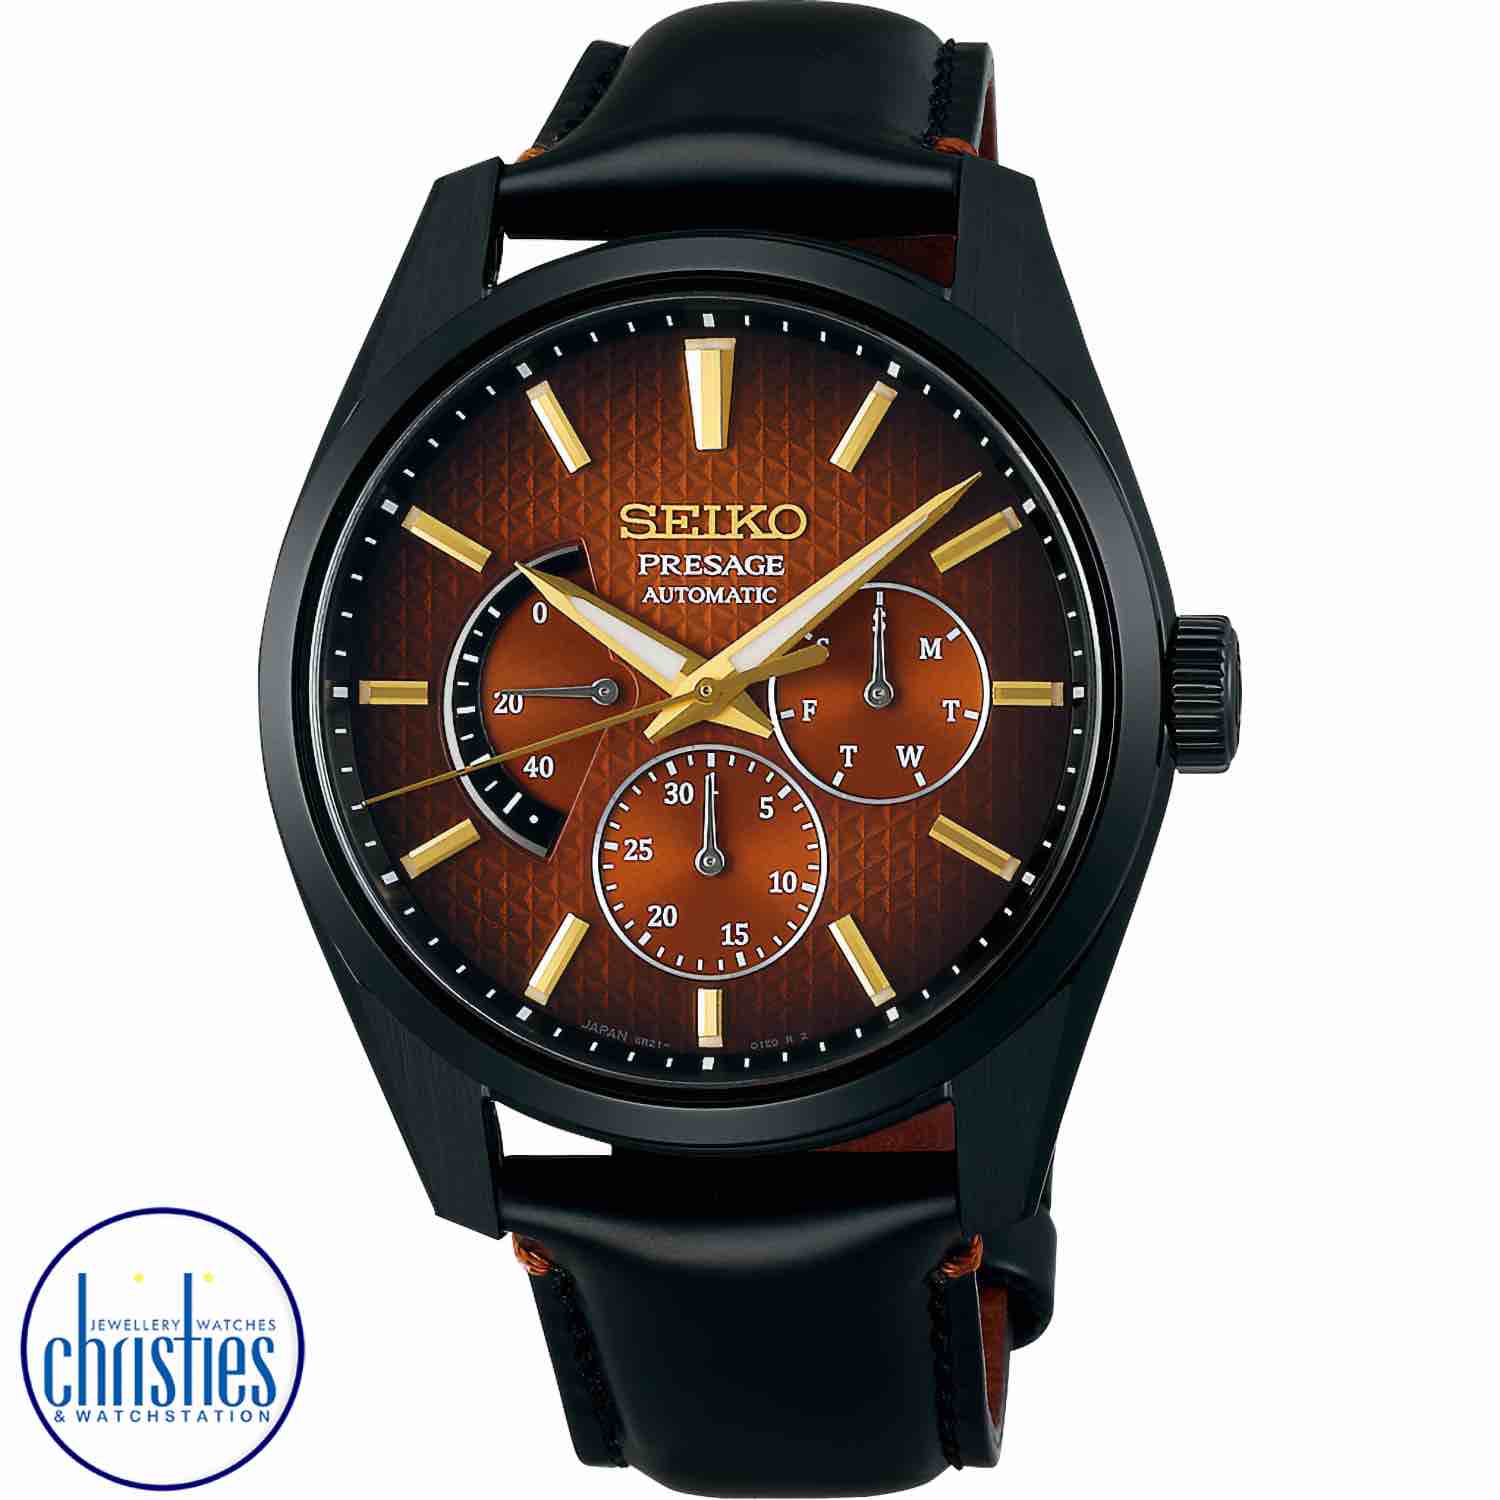 SPB329J Seiko Presage Limited Edition Automatic Watch. SPB329J Seiko Presage Limited Edition Automatic Watch 	Calibre Type - Automatic - Powered By The Movement Of The Wearer	Calibre Function - Analogue - 3 Hands	Accuracy - +25 -15 seconds a DAY(at normal